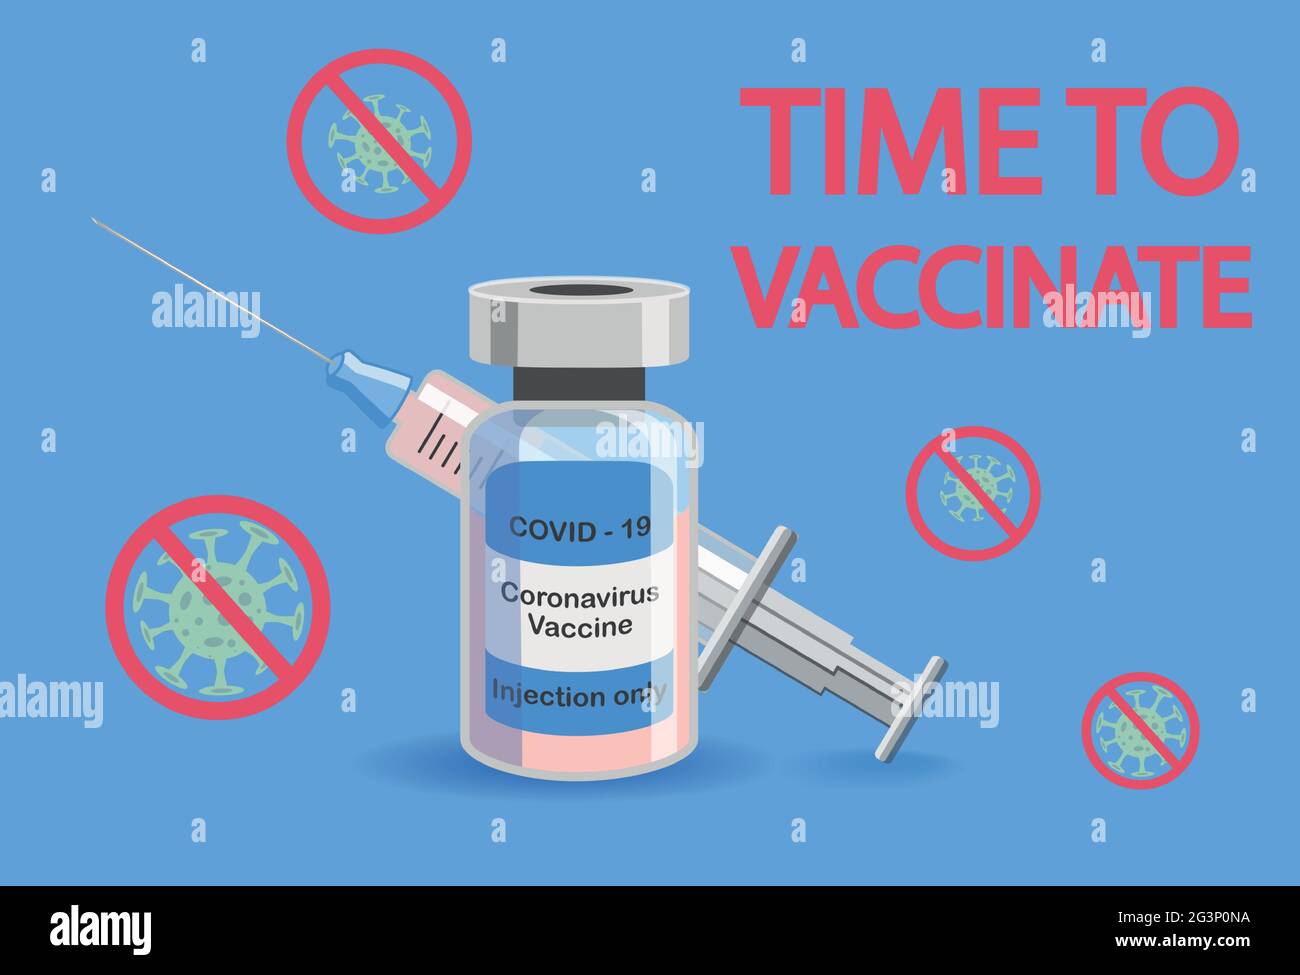 Vaccination concept. Immunization campaign. Vaccination against the vaccine. Health care and security. Syringe and vaccine vial. Medical treatment. Fl Stock Vector